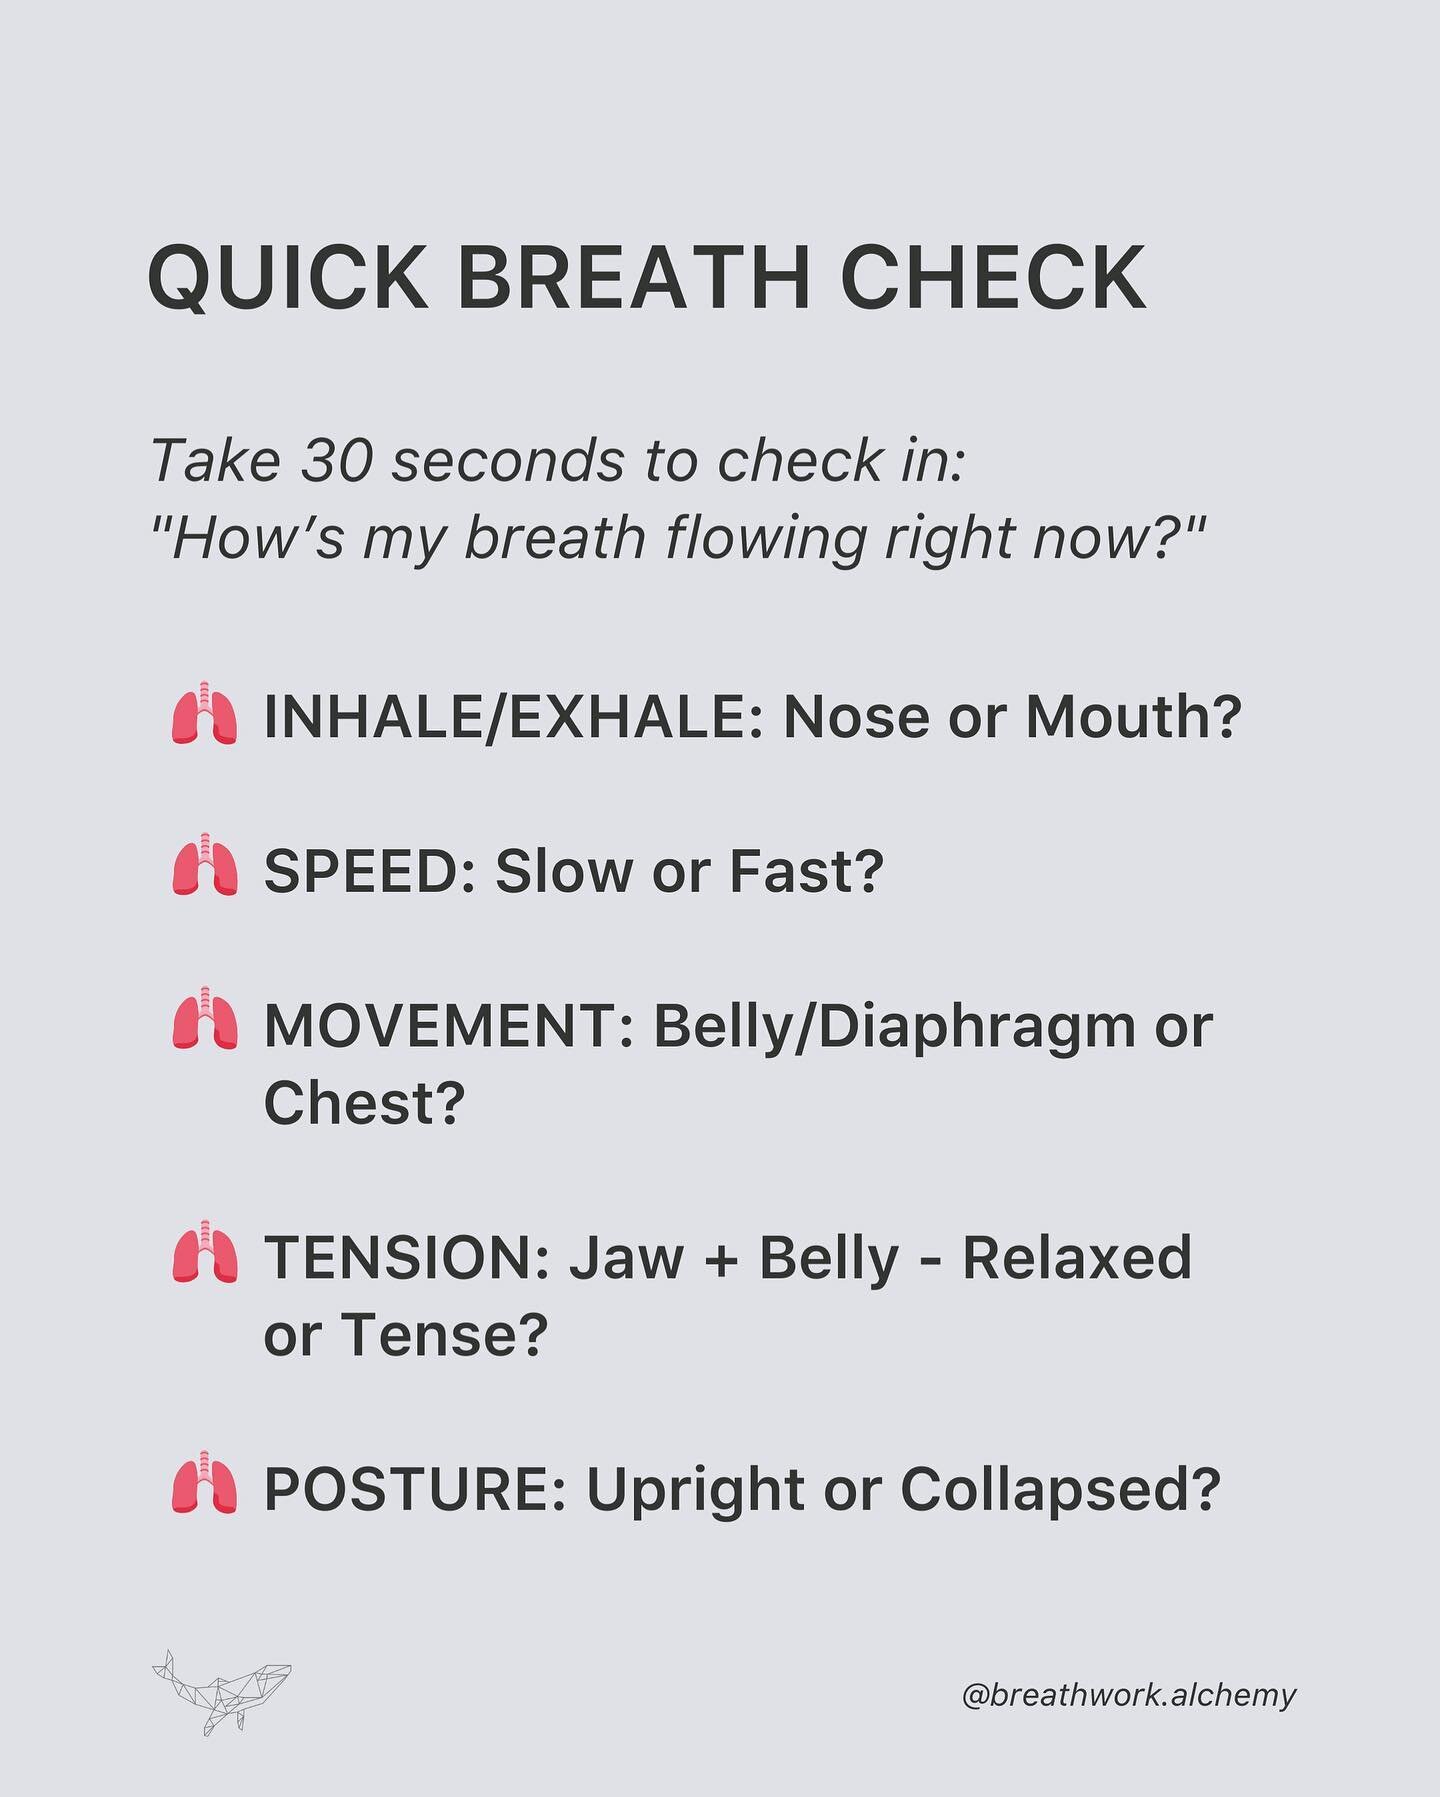 Stop scrolling and check in with your breathing for 30 seconds.

This way you are making the unconscious conscious - you create awareness for your automatic, unconscious breathing patterns. 💨

Why this matters? 👇

Many of us have suboptimal breathi